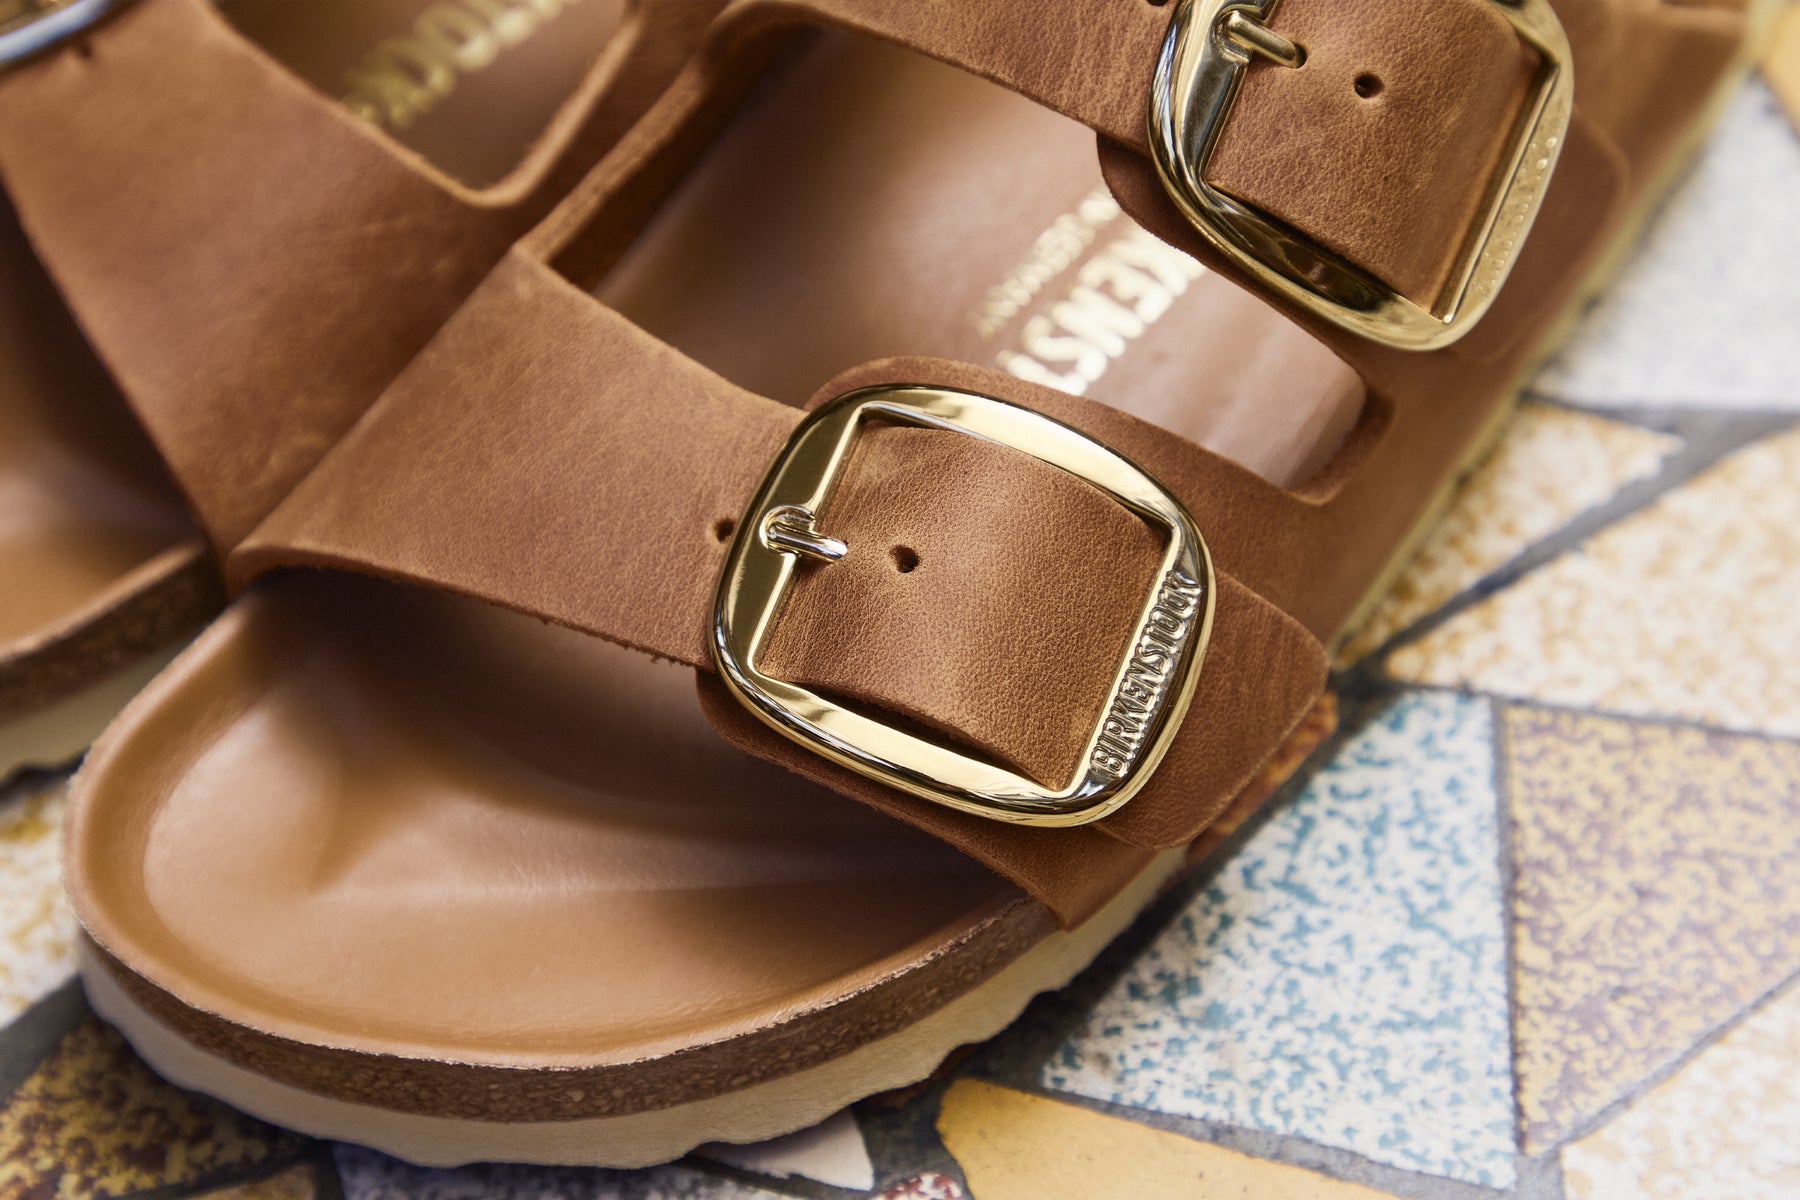 Spring into comfortable and stylish sandals